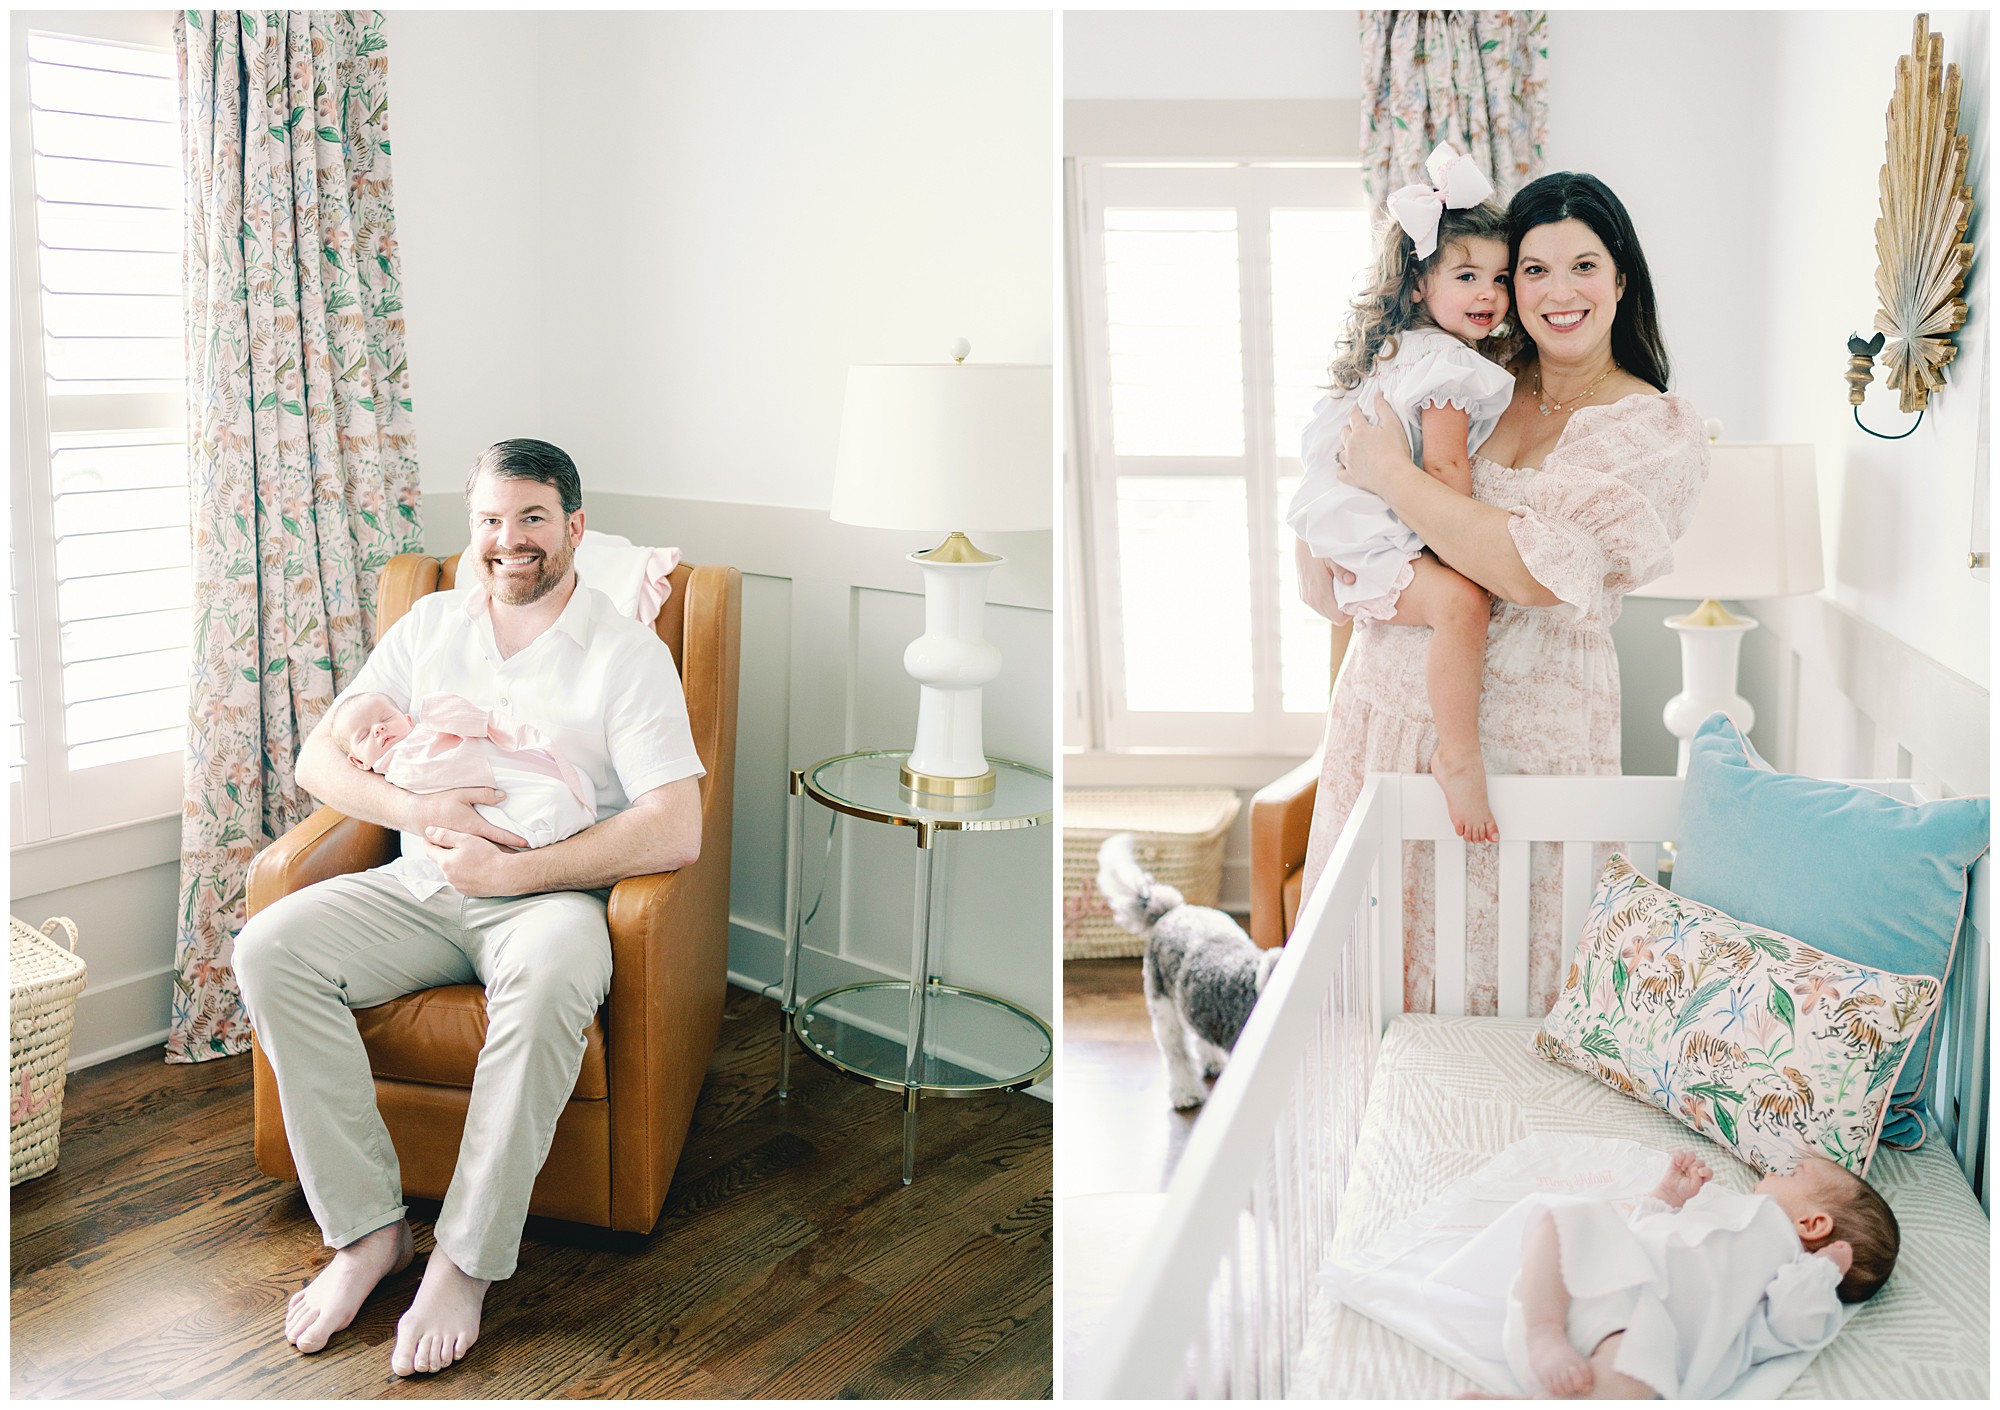 Image collage of parents with their newborn baby and toddler daughter in a a baby girl's nursery.